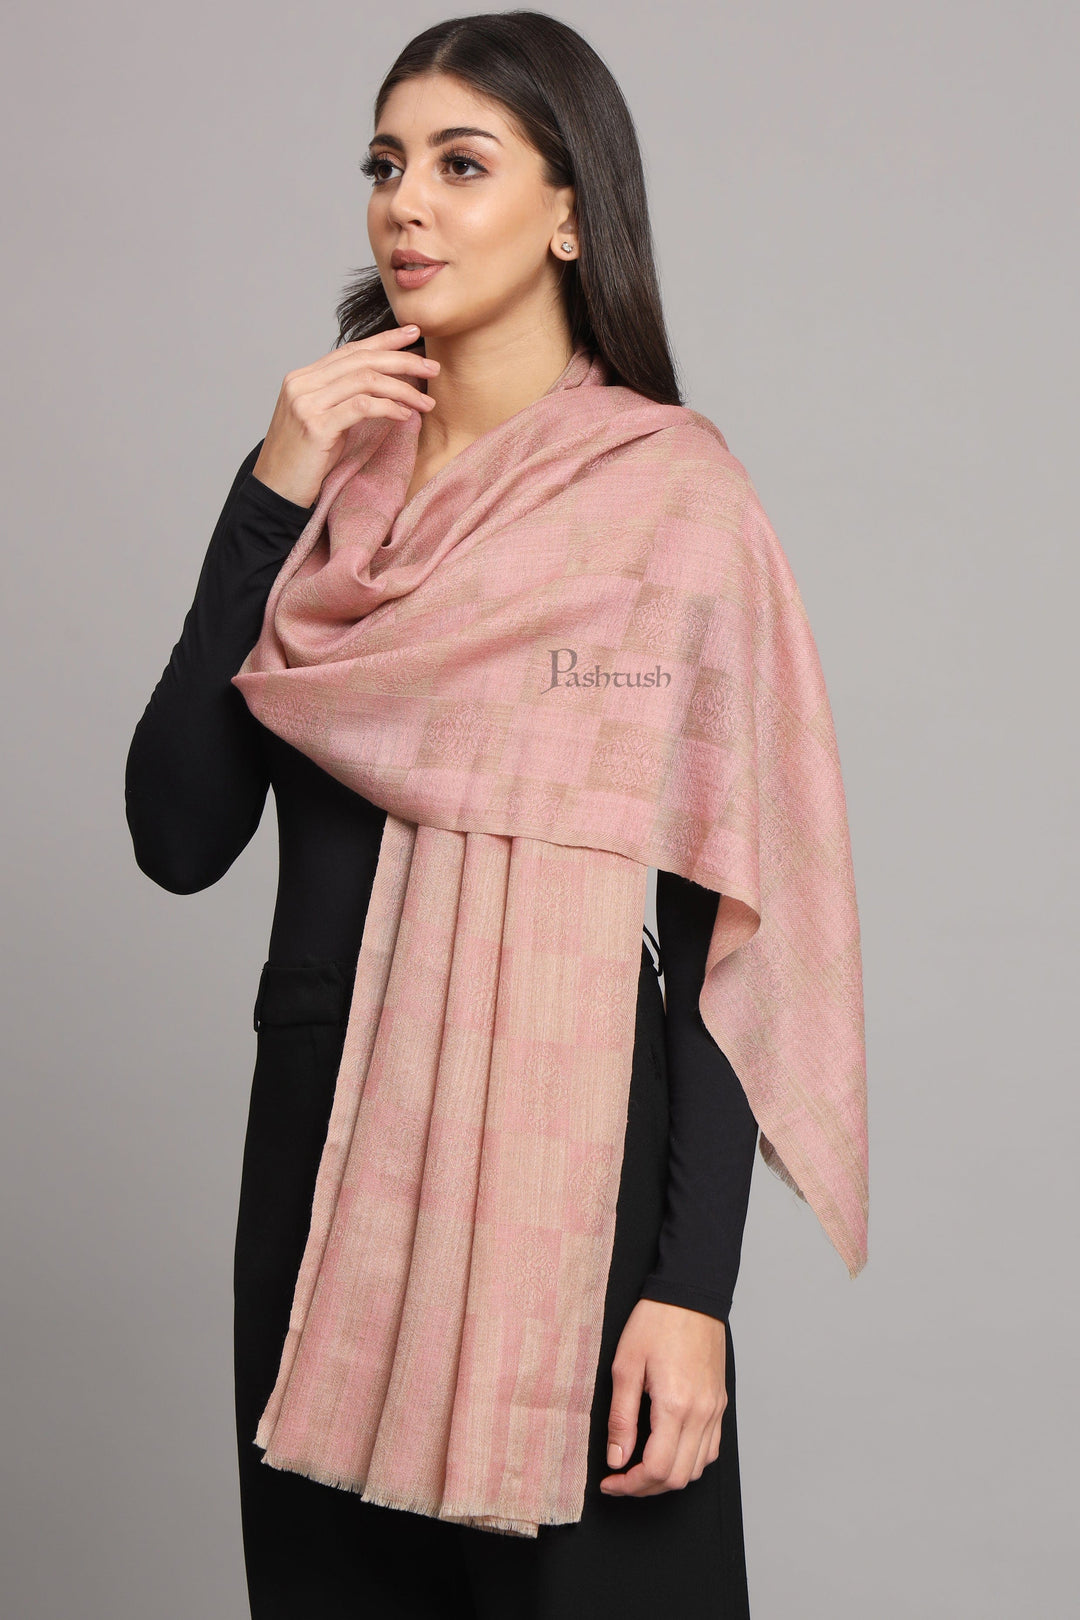 Pashtush India Womens Stoles and Scarves Scarf Pashtush Womens Extra Fine Wool Stole, Checkered Design, Pink